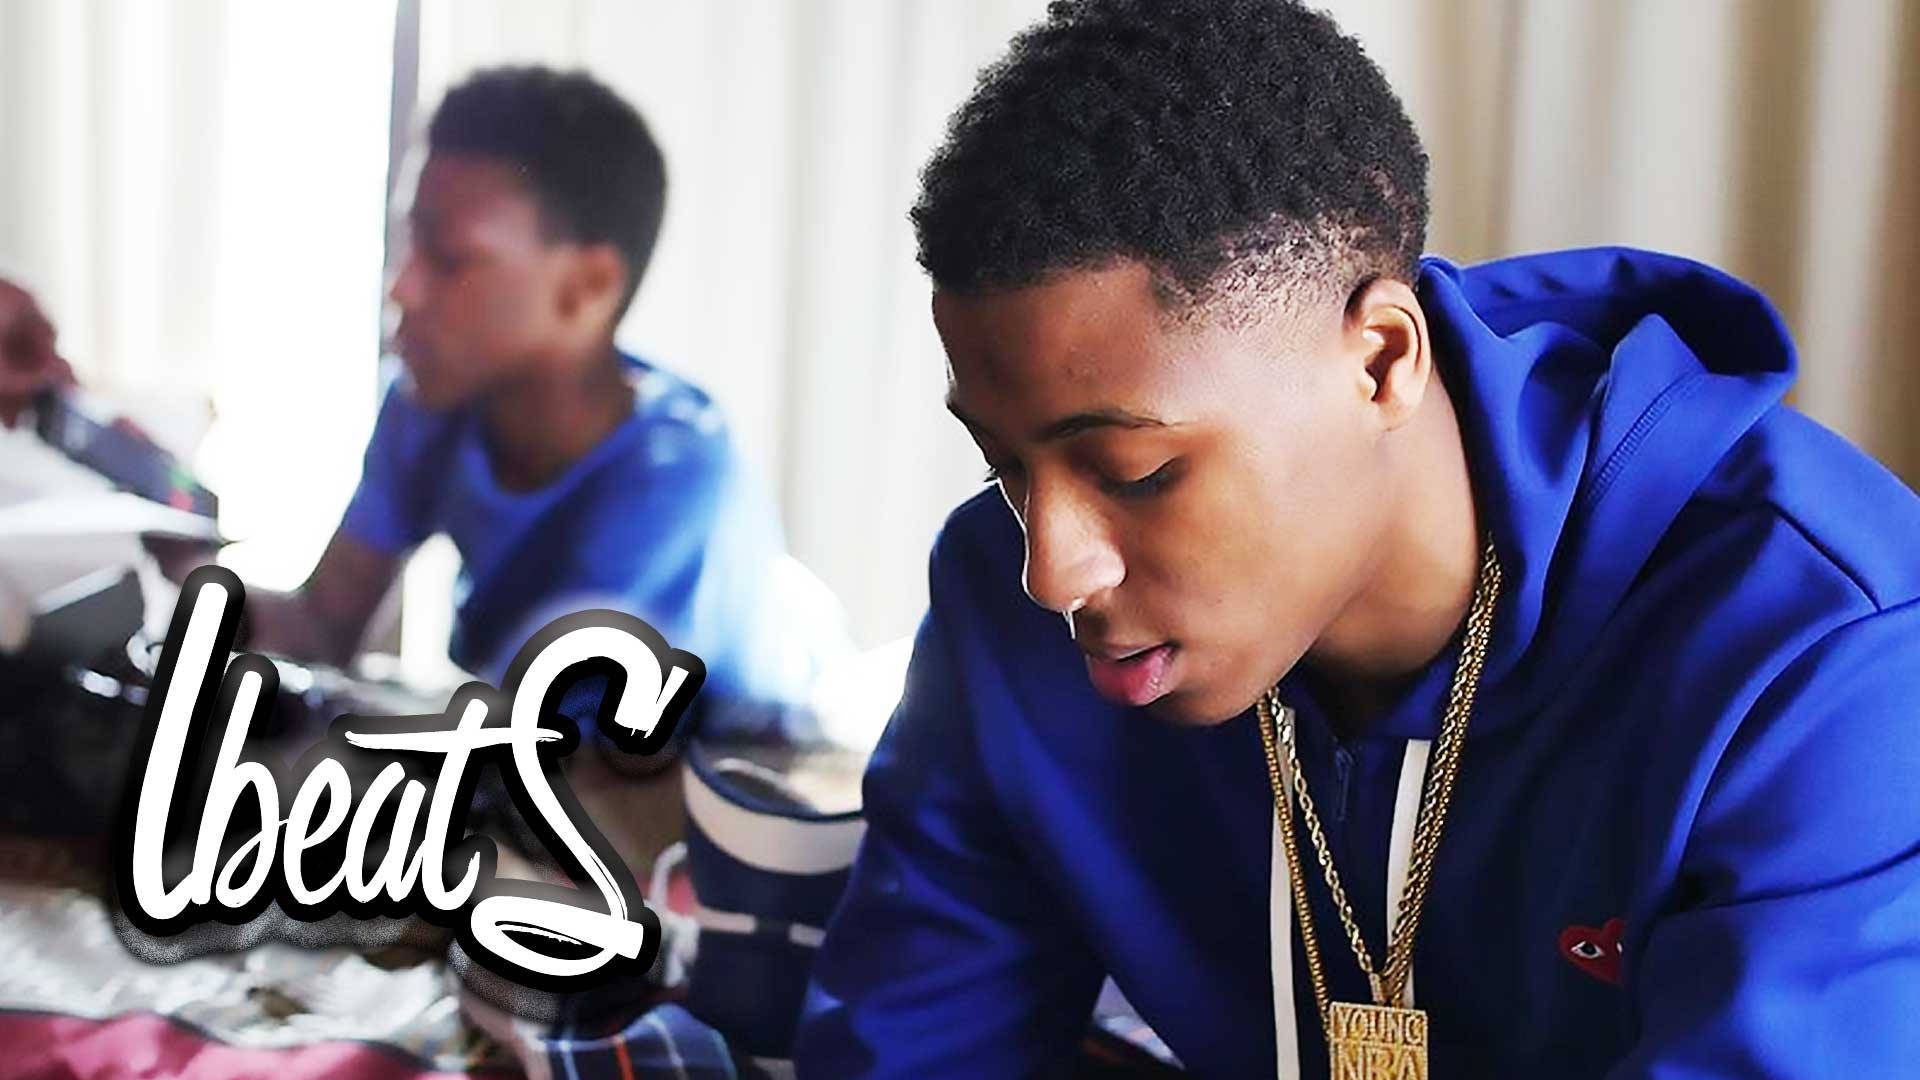 Best Cool NBA Youngboy Wallpapers